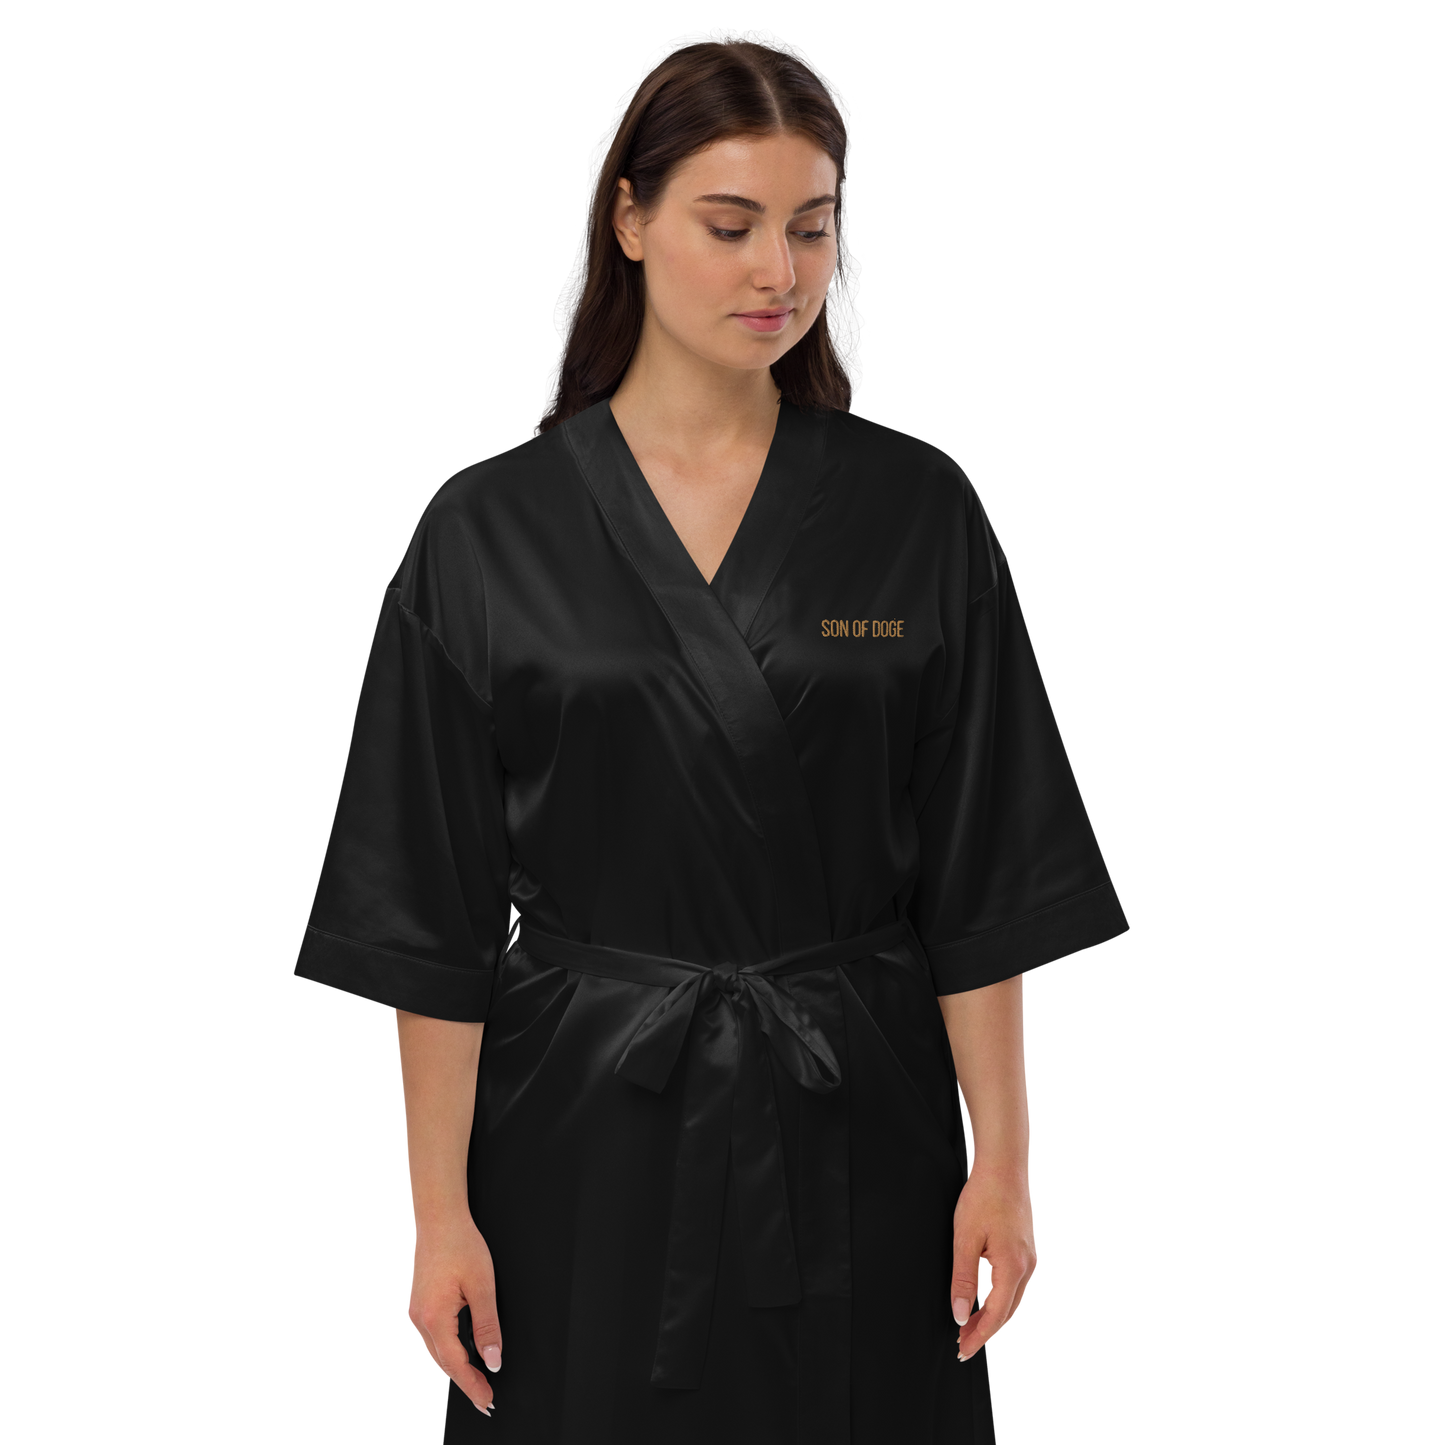 Son Of Doge Satin robe (gold embroidery)